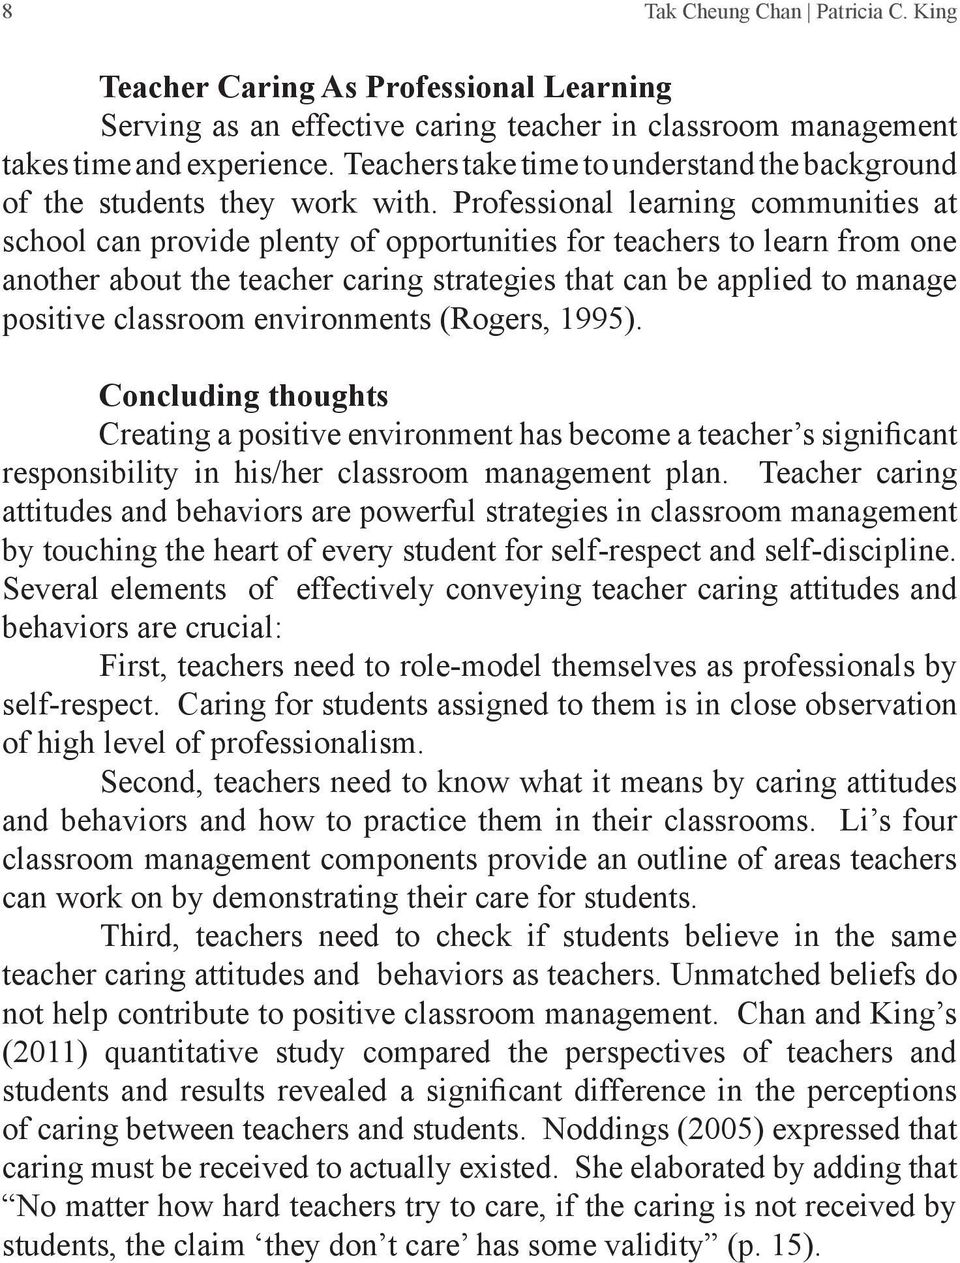 Professional learning communities at school can provide plenty of opportunities for teachers to learn from one another about the teacher caring strategies that can be applied to manage positive